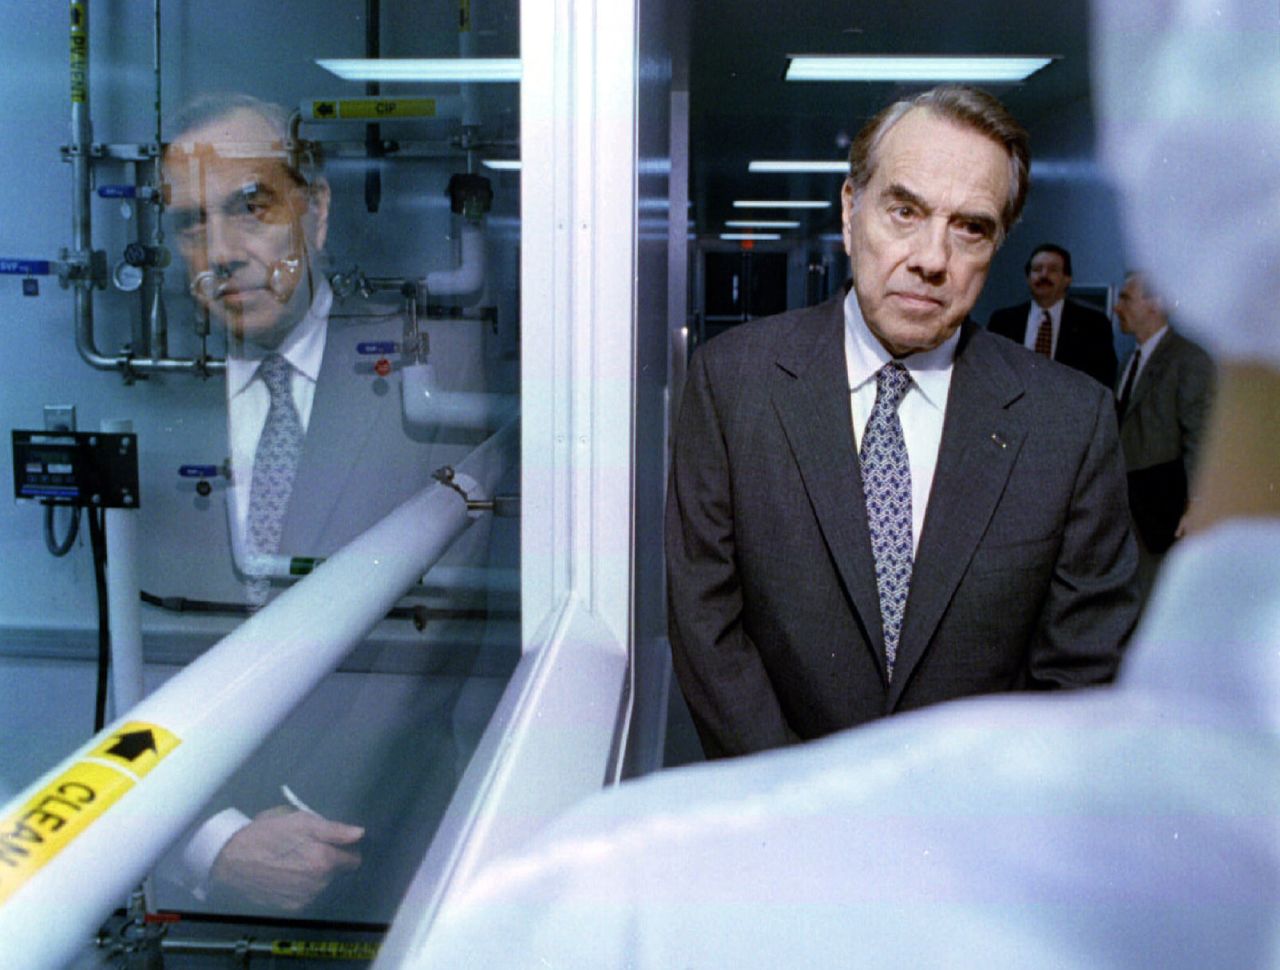 Dole listens to a technician during a campaign stop at a pharmaceutical company in Portsmouth, New Hampshire, in 1996.